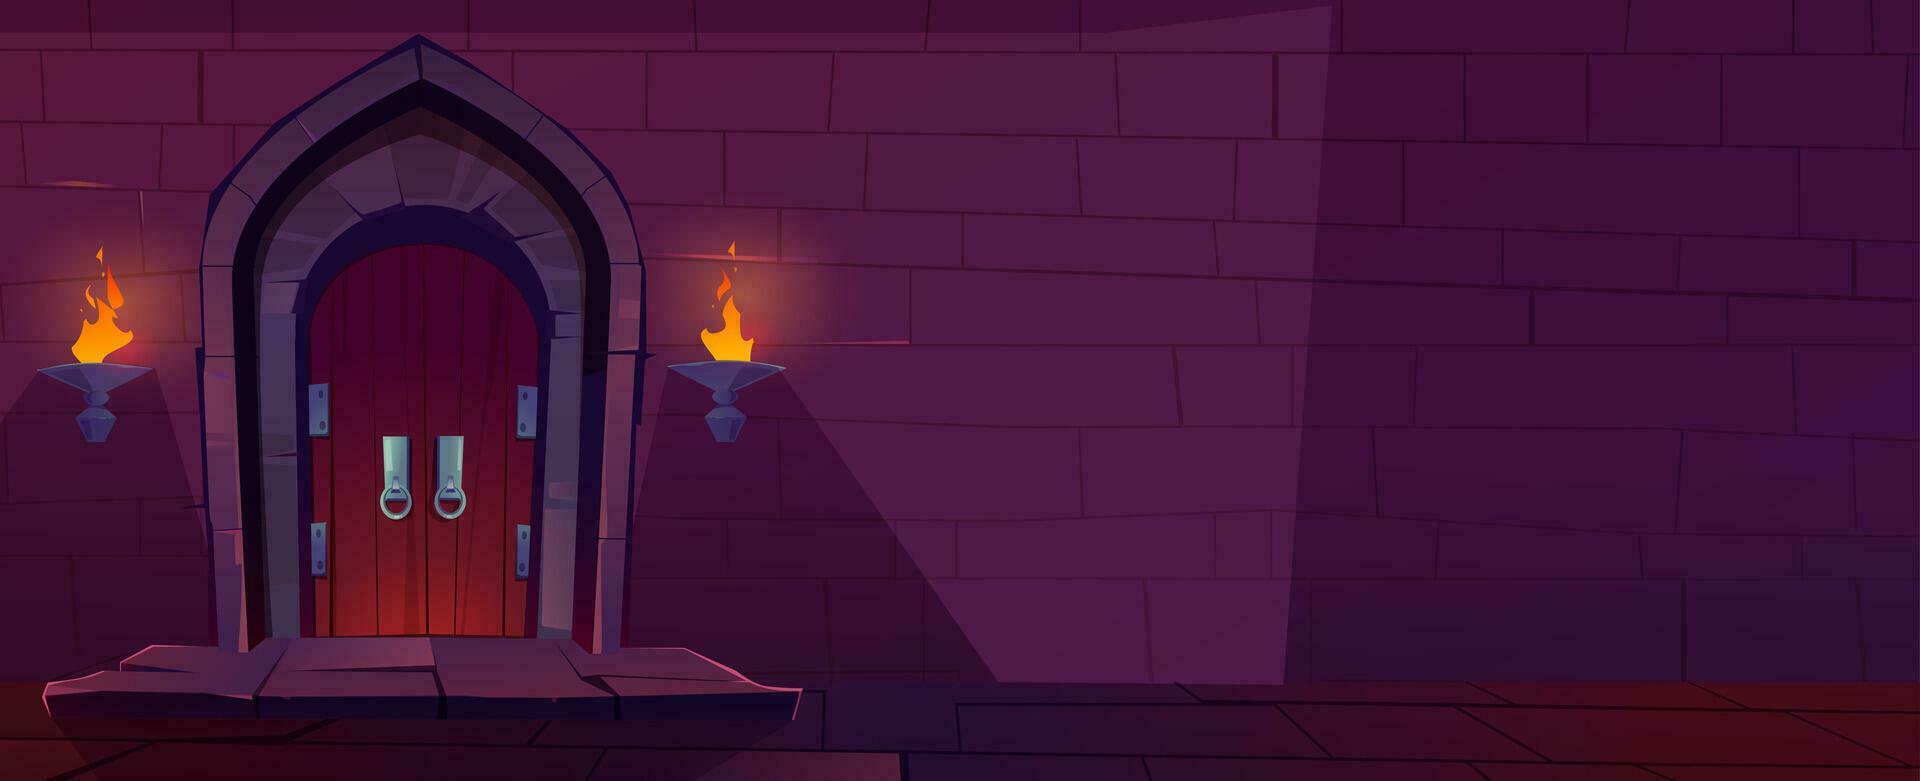 Castle dungeon wall cartoon background for game vector